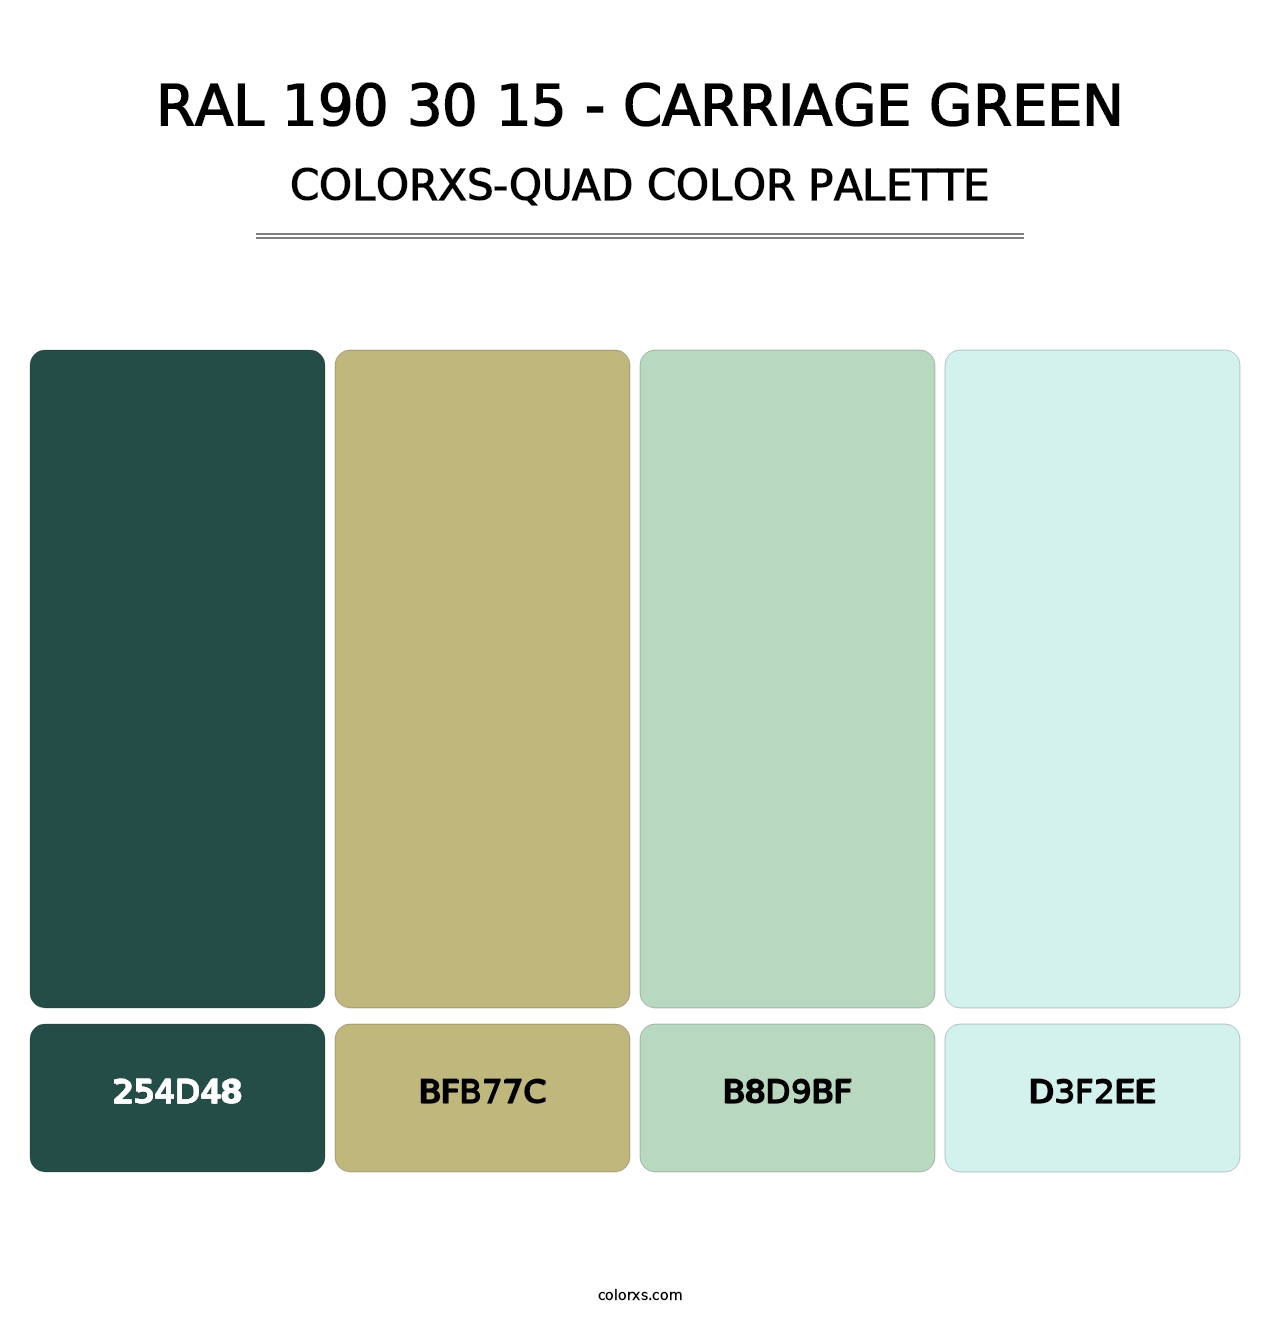 RAL 190 30 15 - Carriage Green - Colorxs Quad Palette